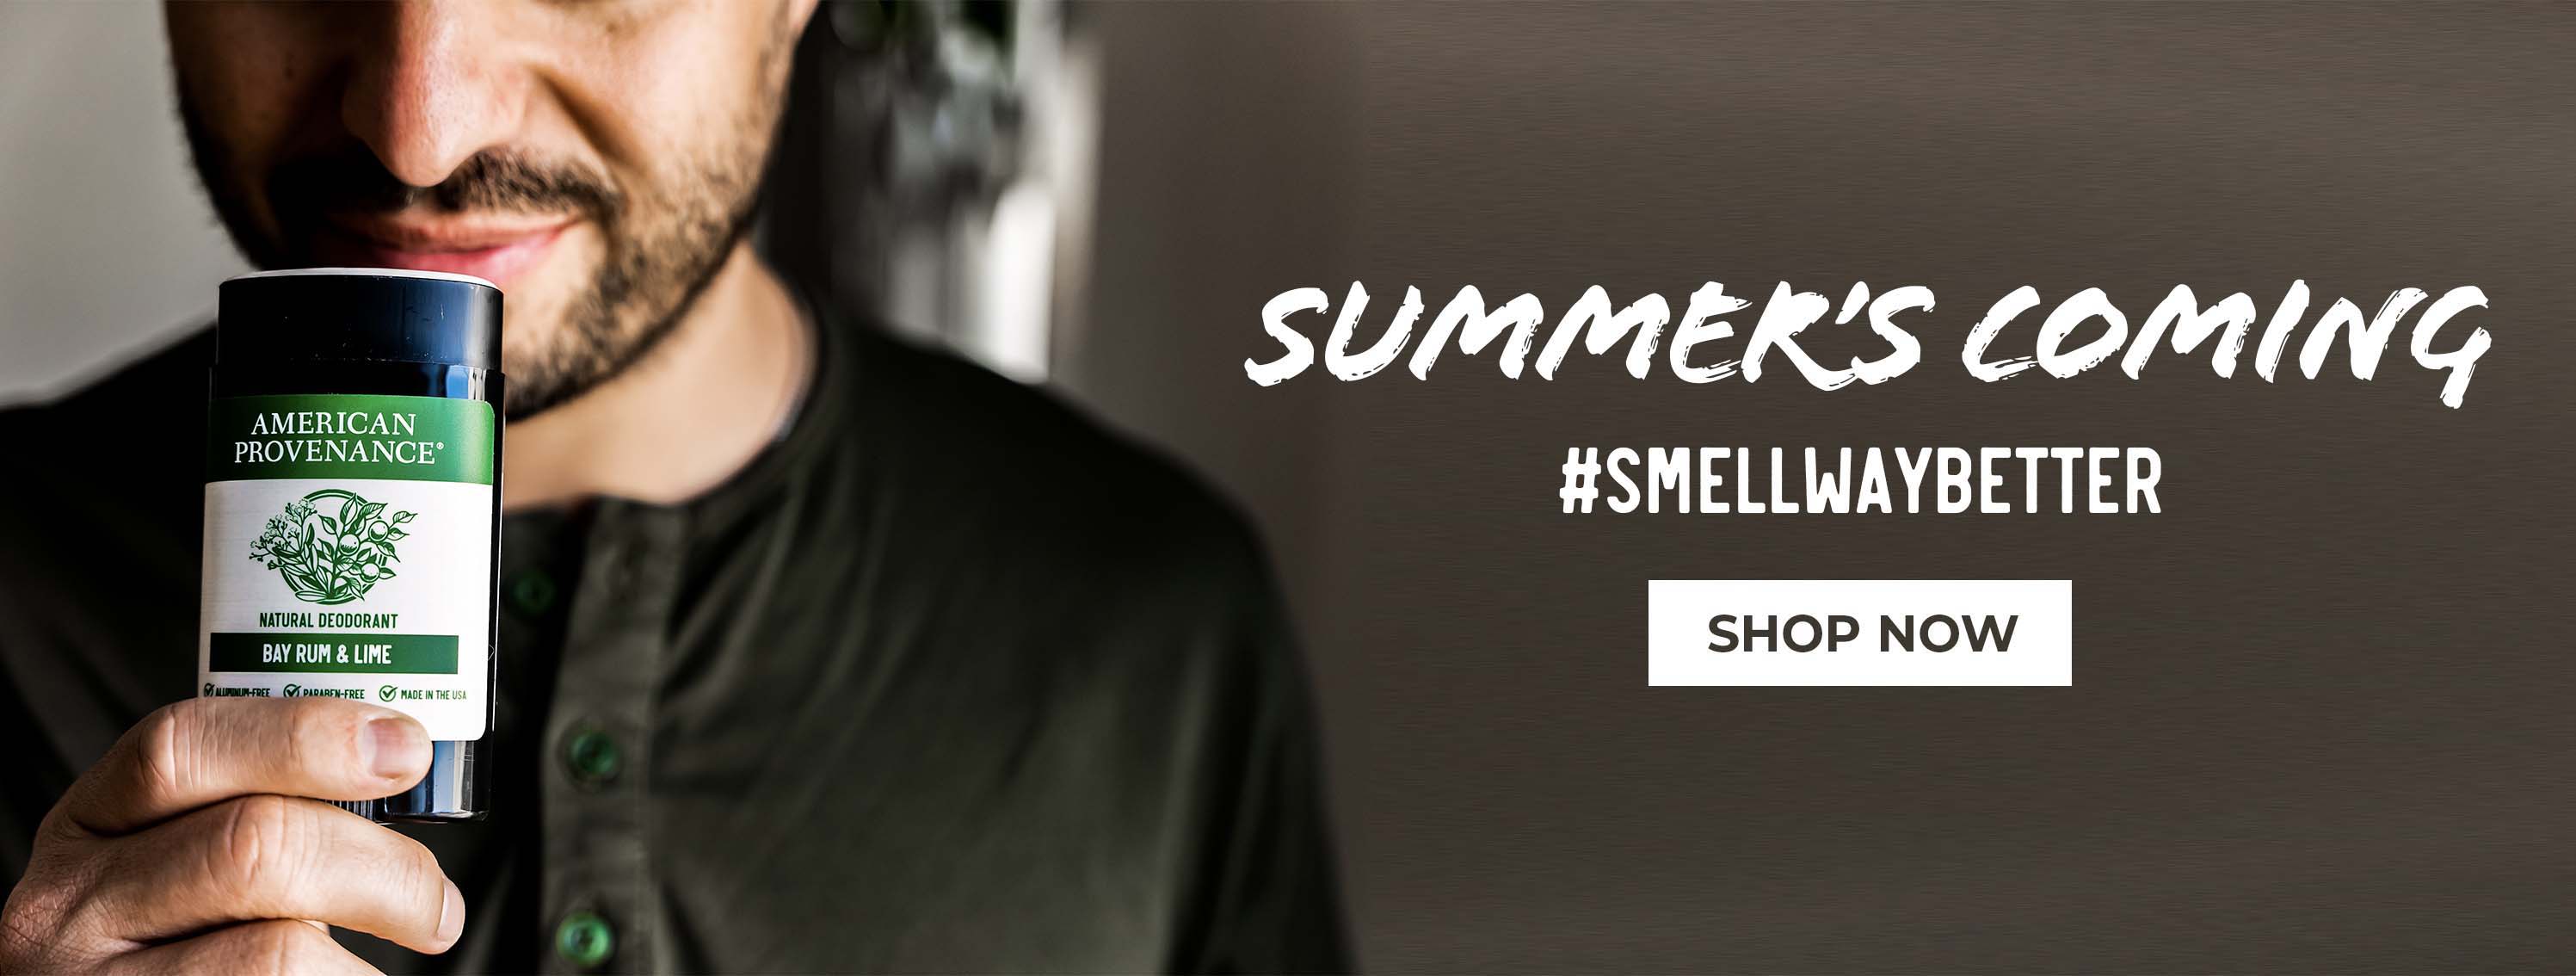 Summer's Coming. #Smellwaybetter shop now